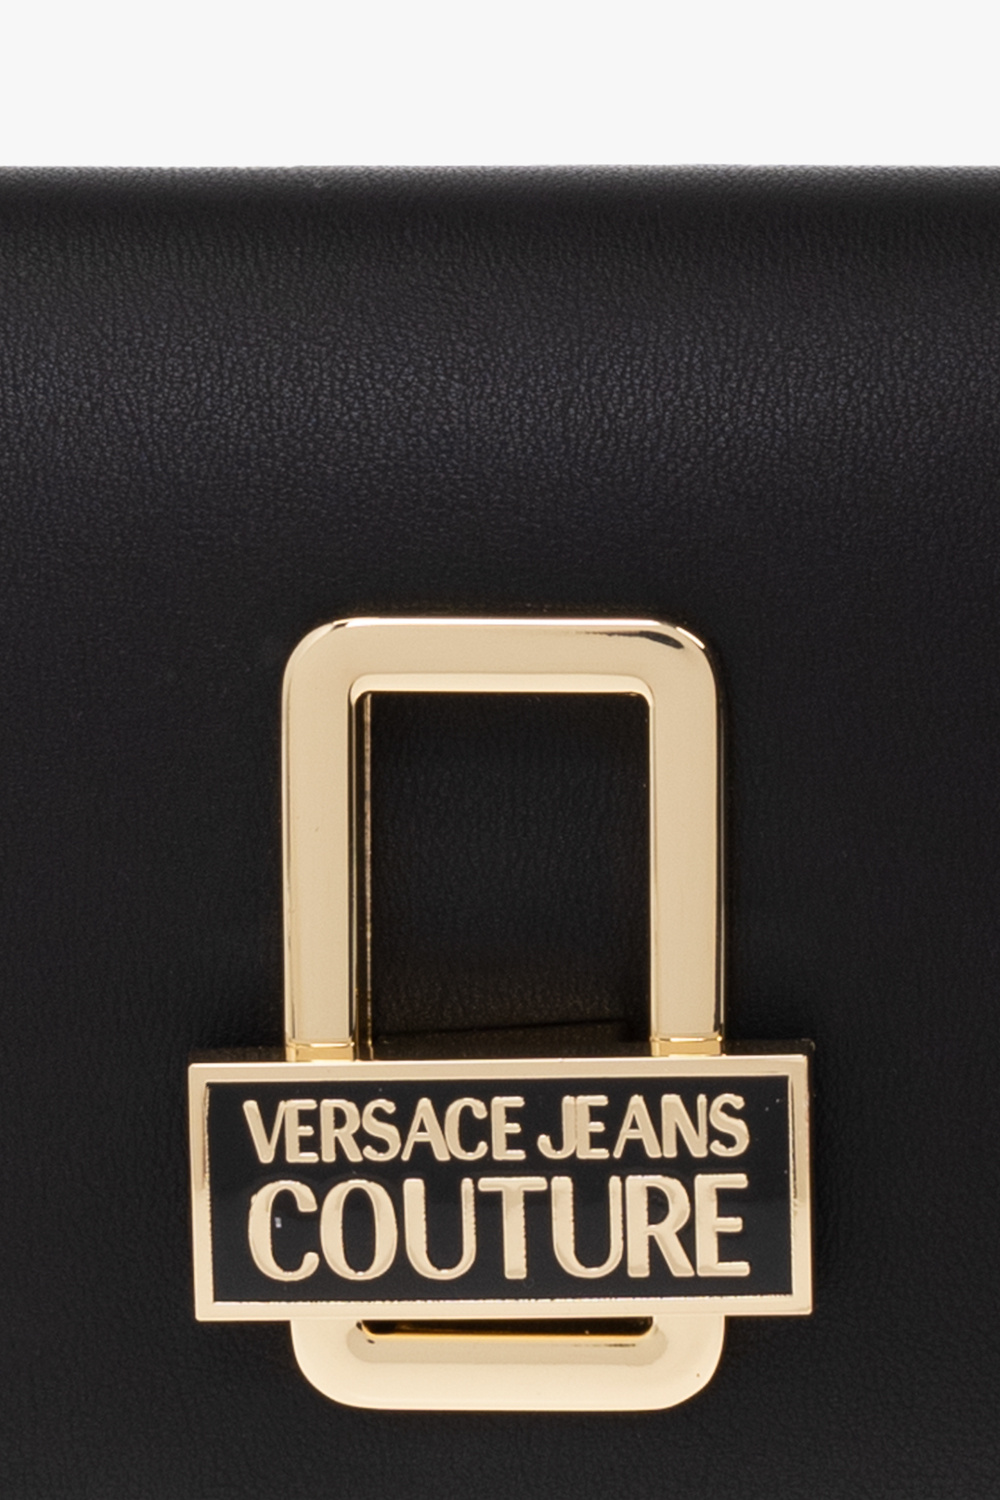 Versace Jeans Couture Shoulder bag with one